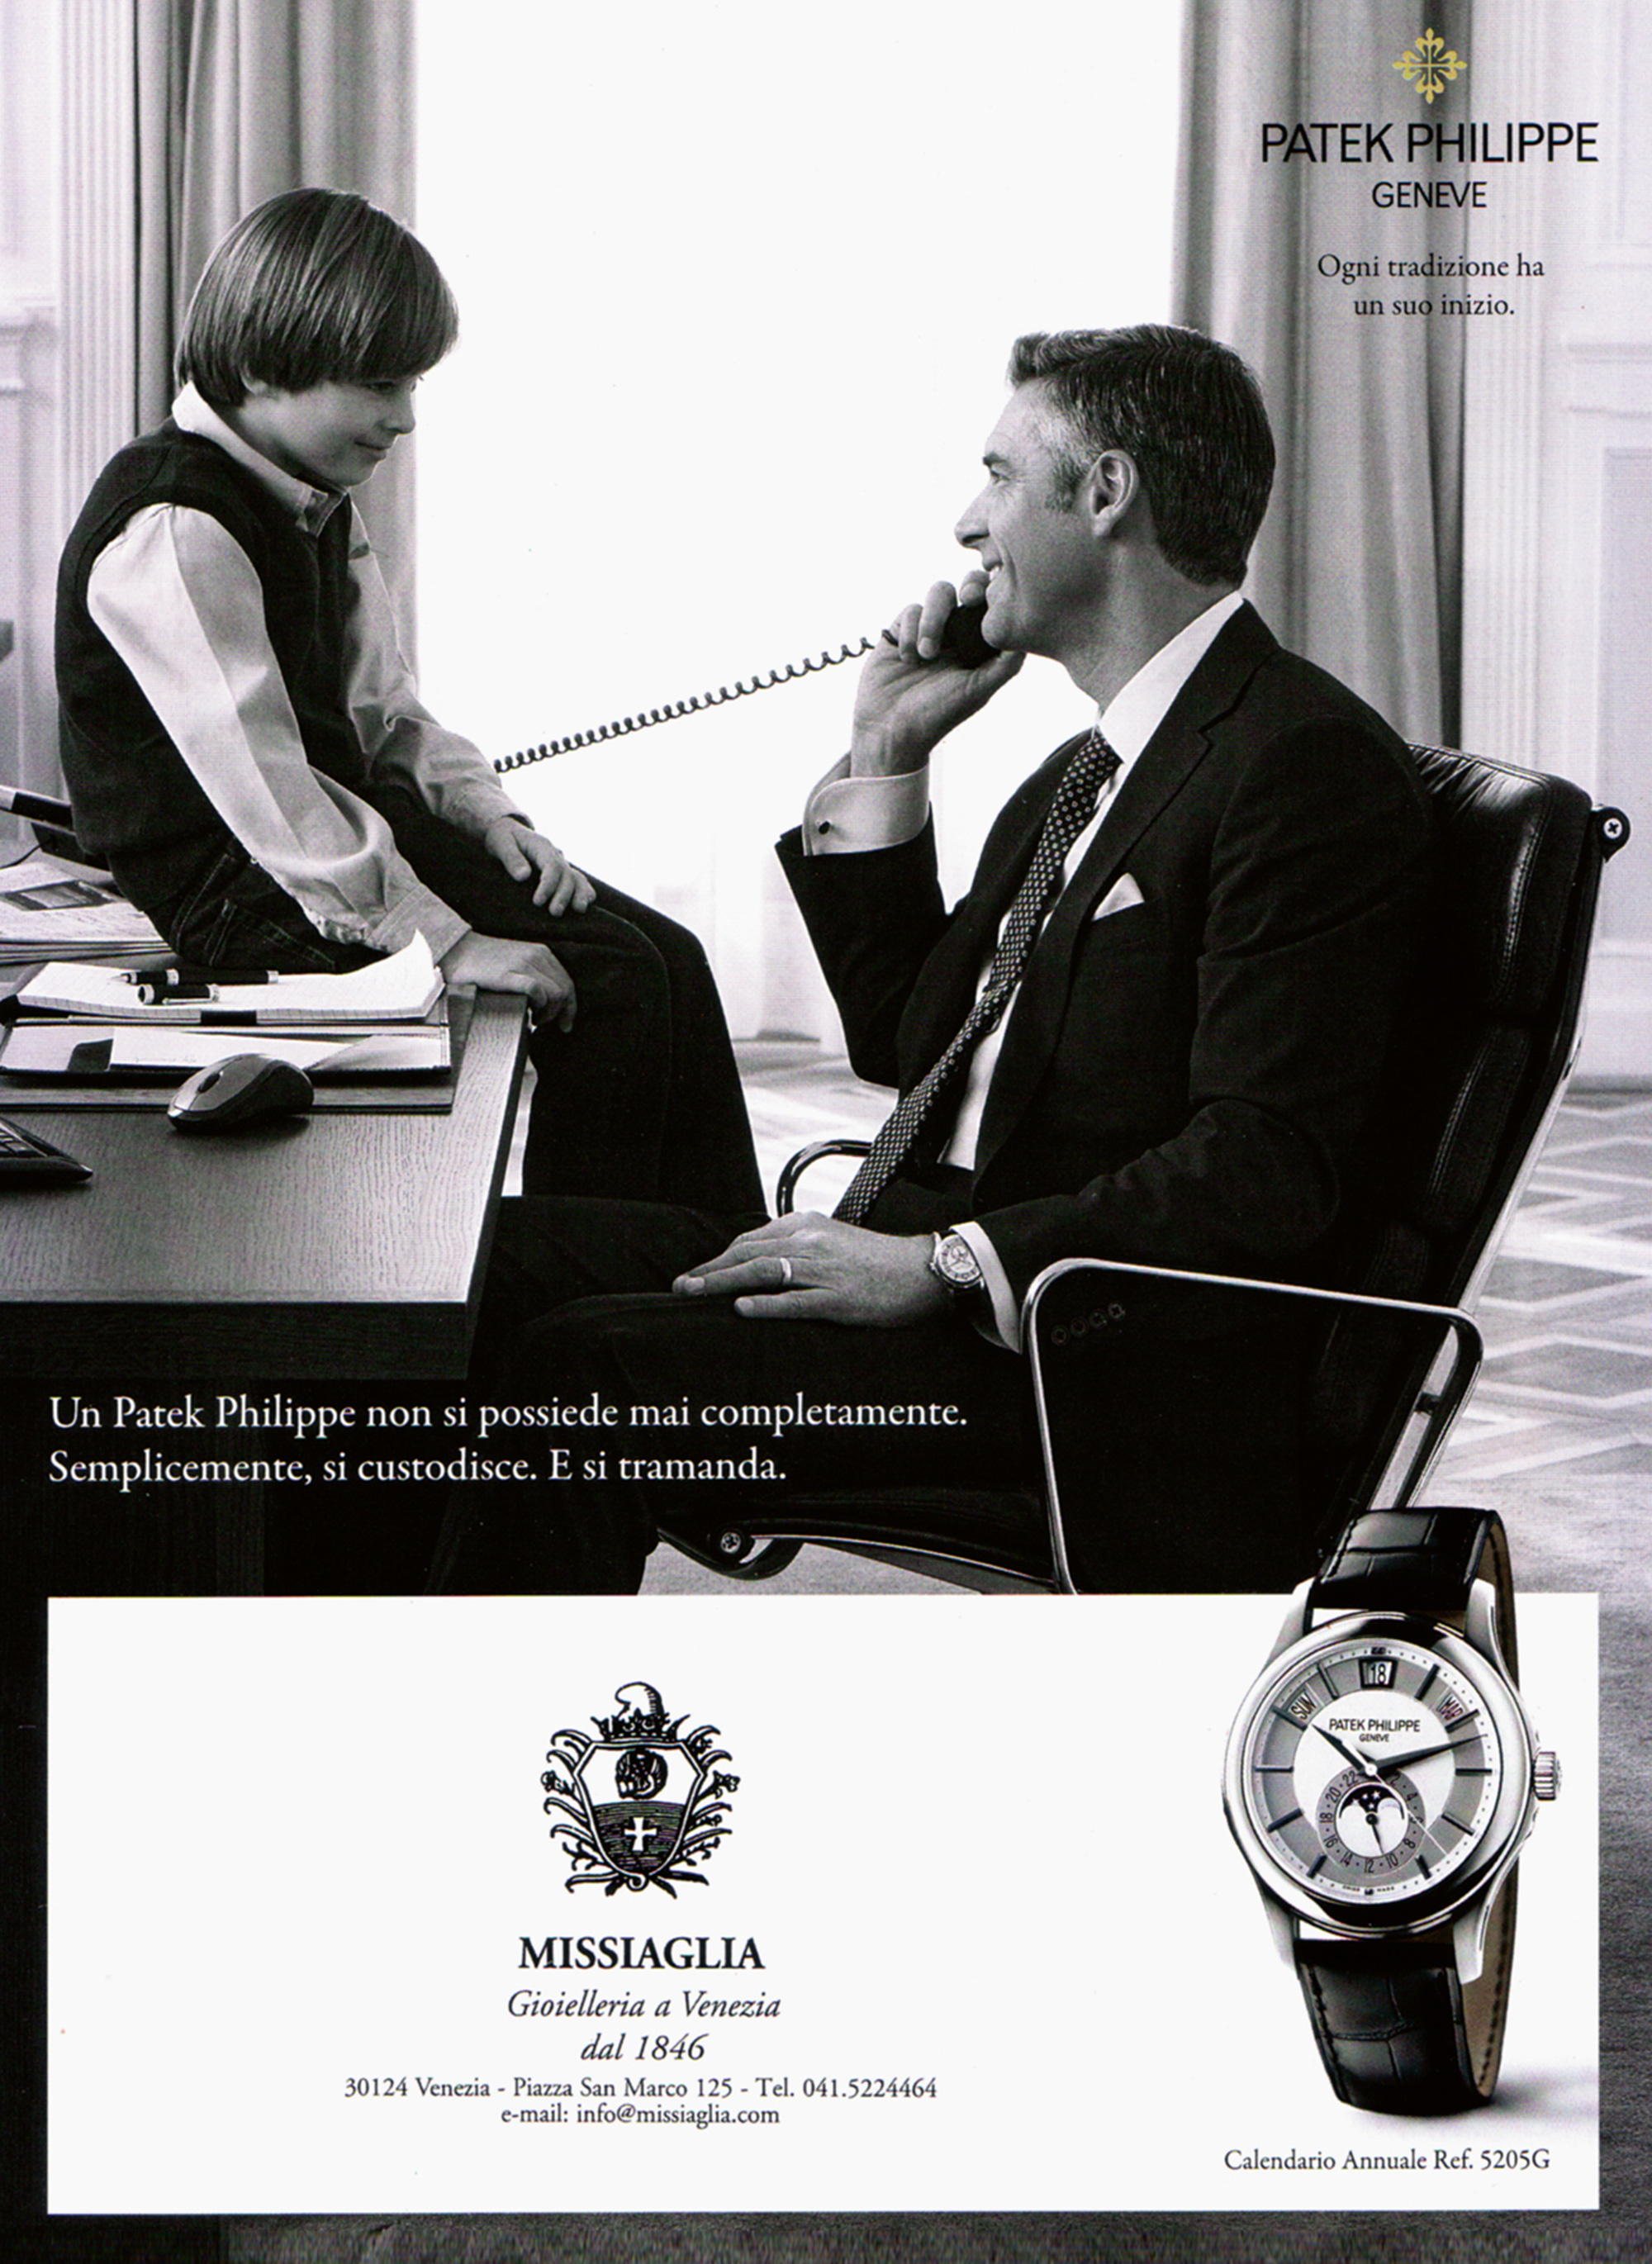 An advertisement for Patek Philippe depicting a father and son. 